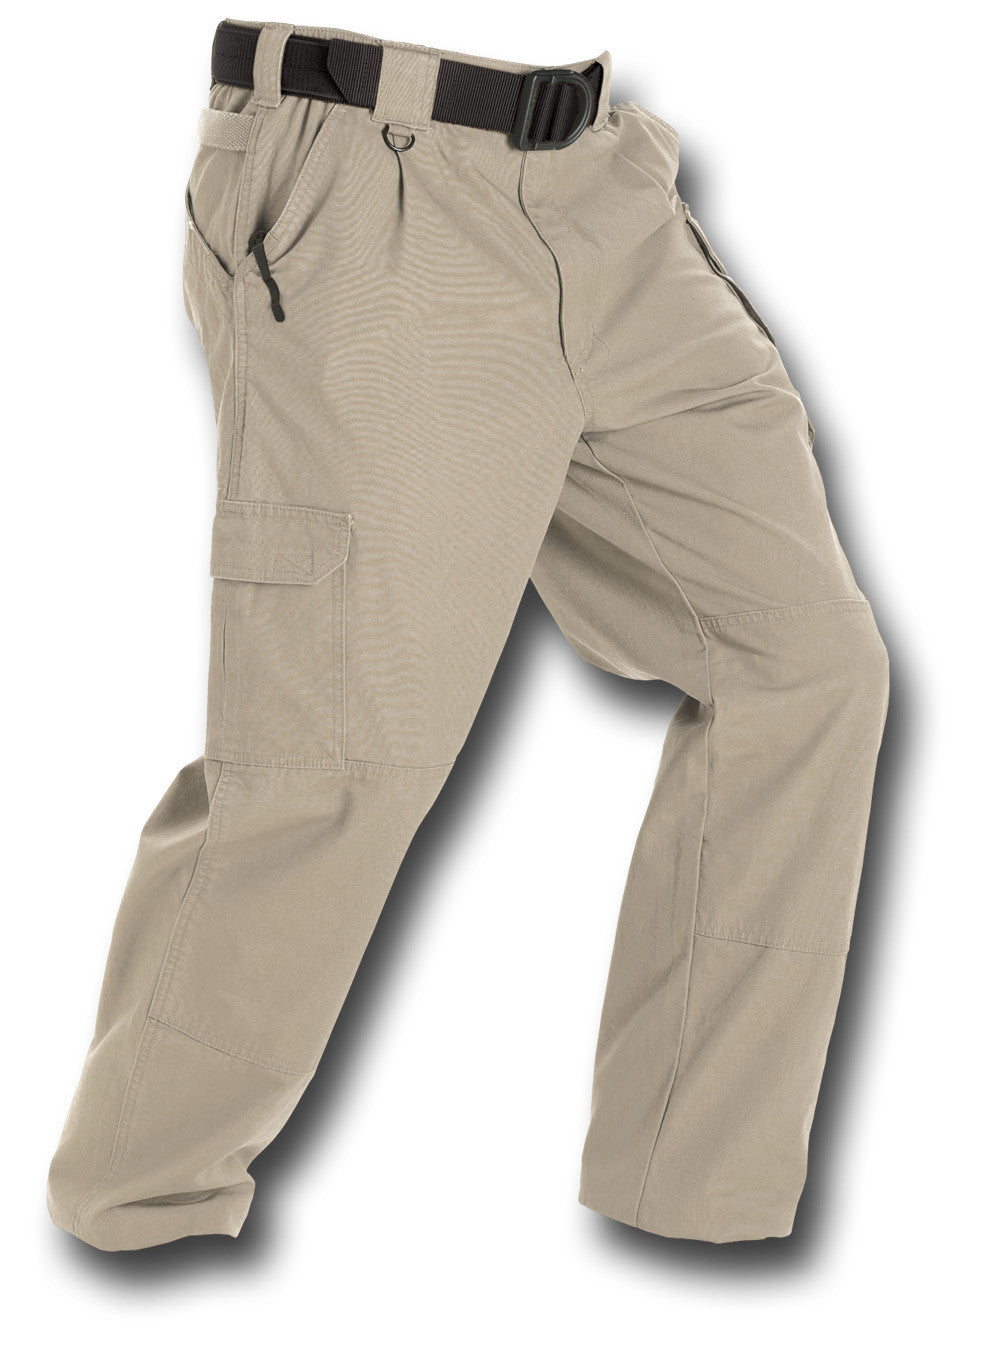 5.11 TACTICAL COTTON TROUSERS